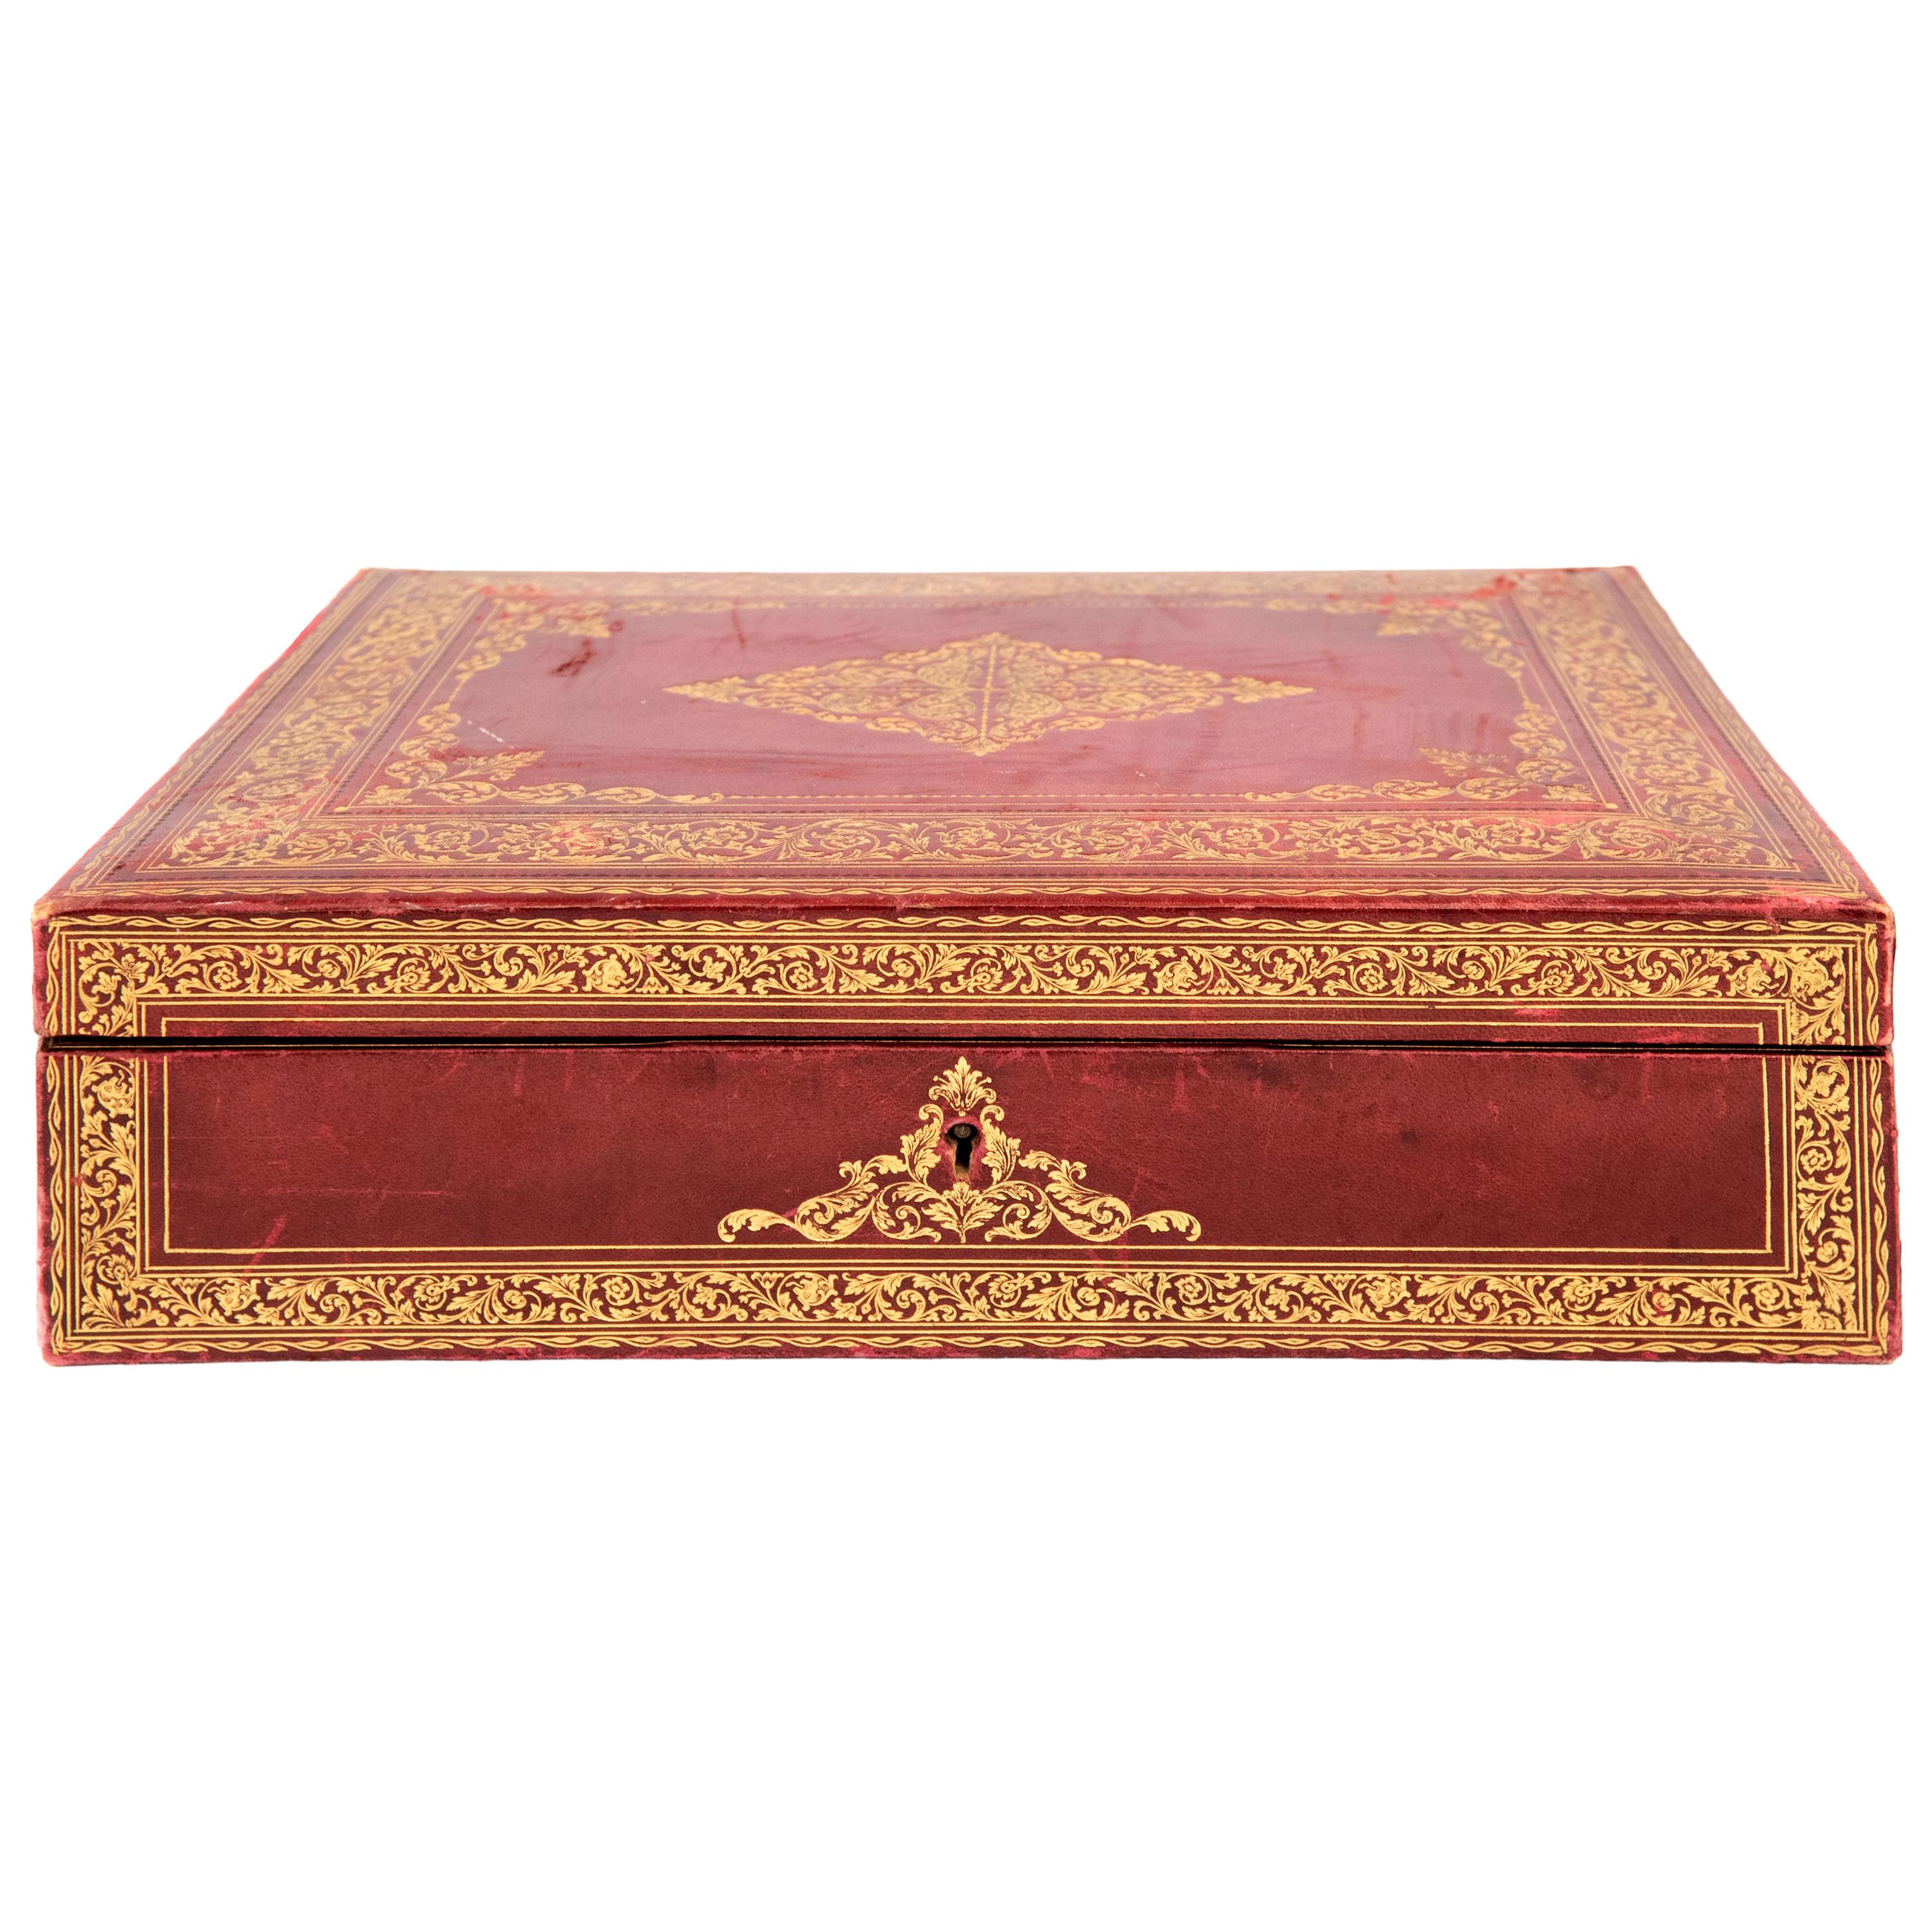 19th Century Italian Stamped and Gilt Red Leather Box with Suede Interior For Sale